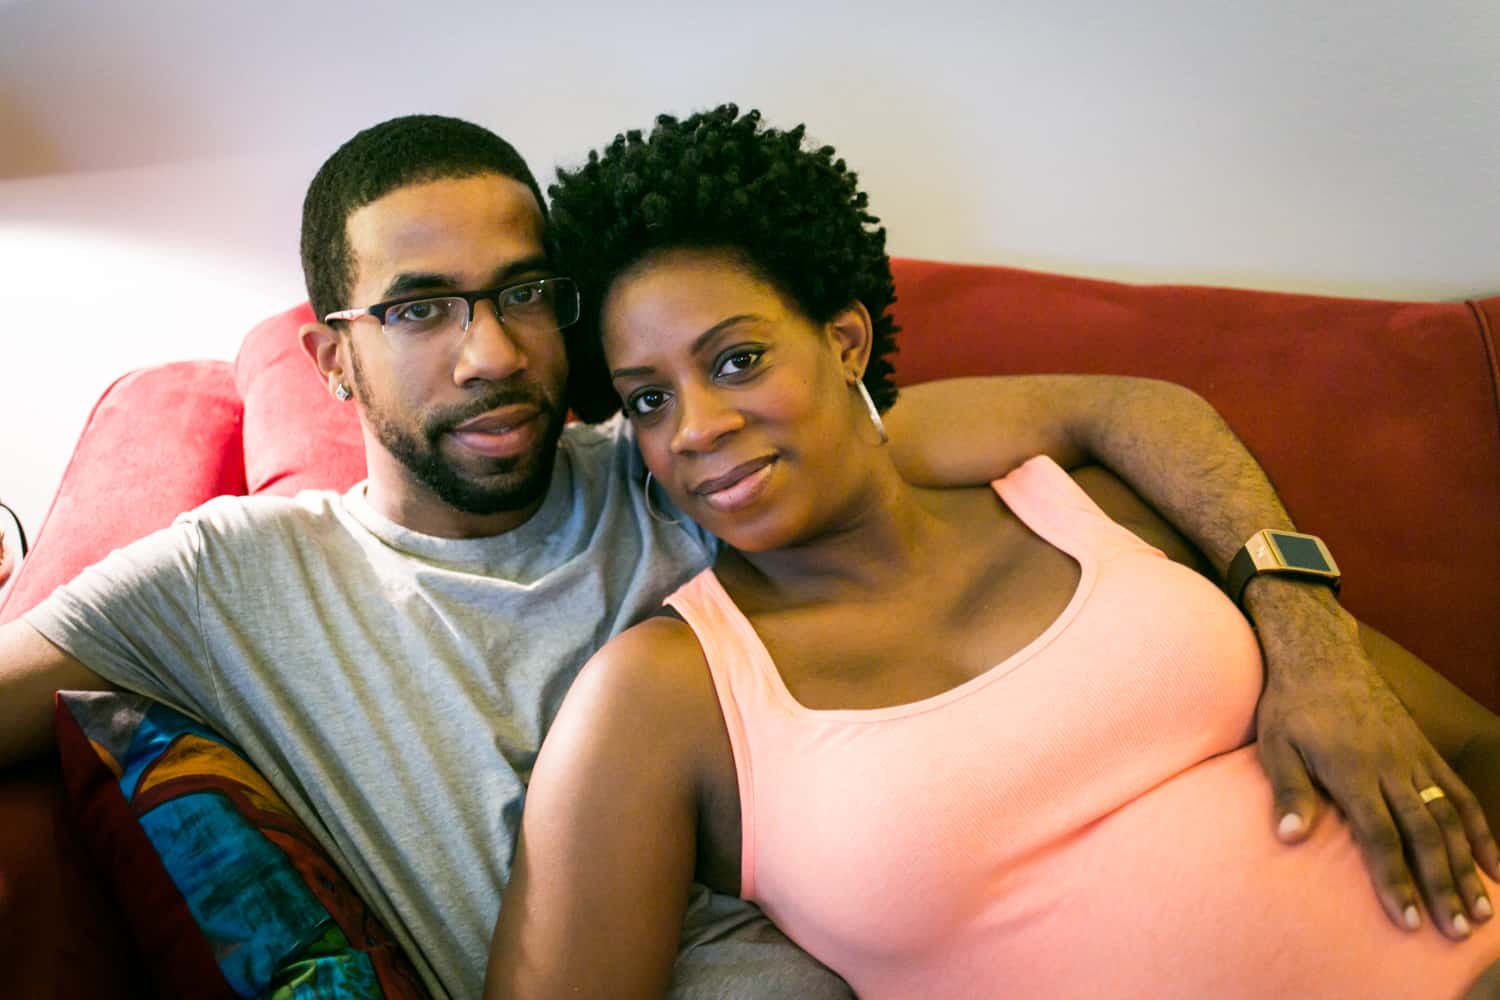 Parents-to-be sitting on couch by Queens maternity photographer